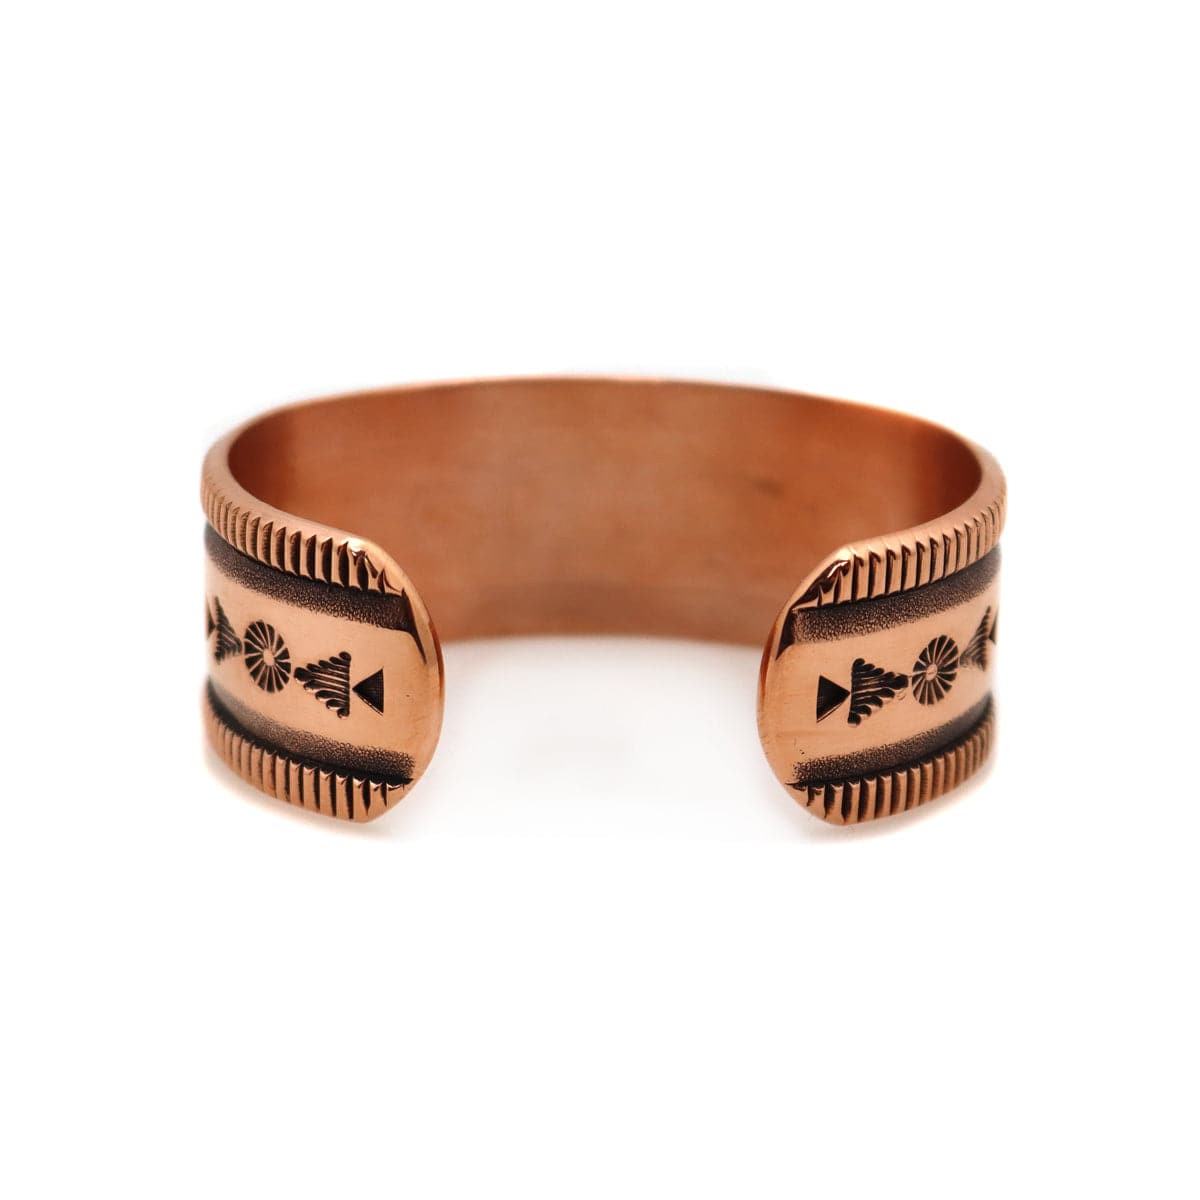 Kee Nataani - Navajo Contemporary Copper Bracelet with Stamped Design, size 5.5 (J13322)3
